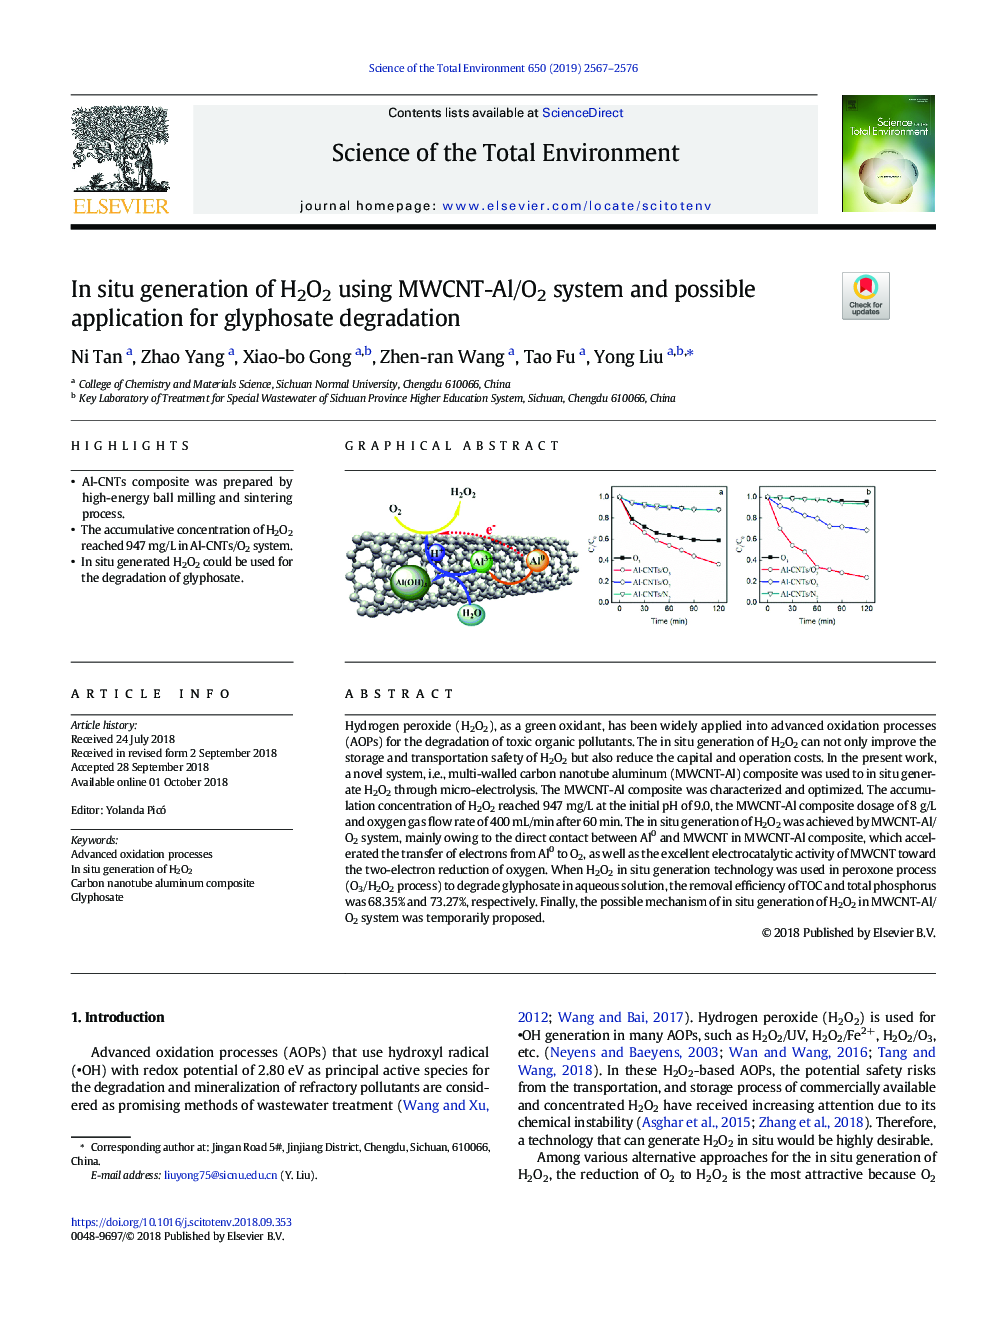 In situ generation of H2O2 using MWCNT-Al/O2 system and possible application for glyphosate degradation